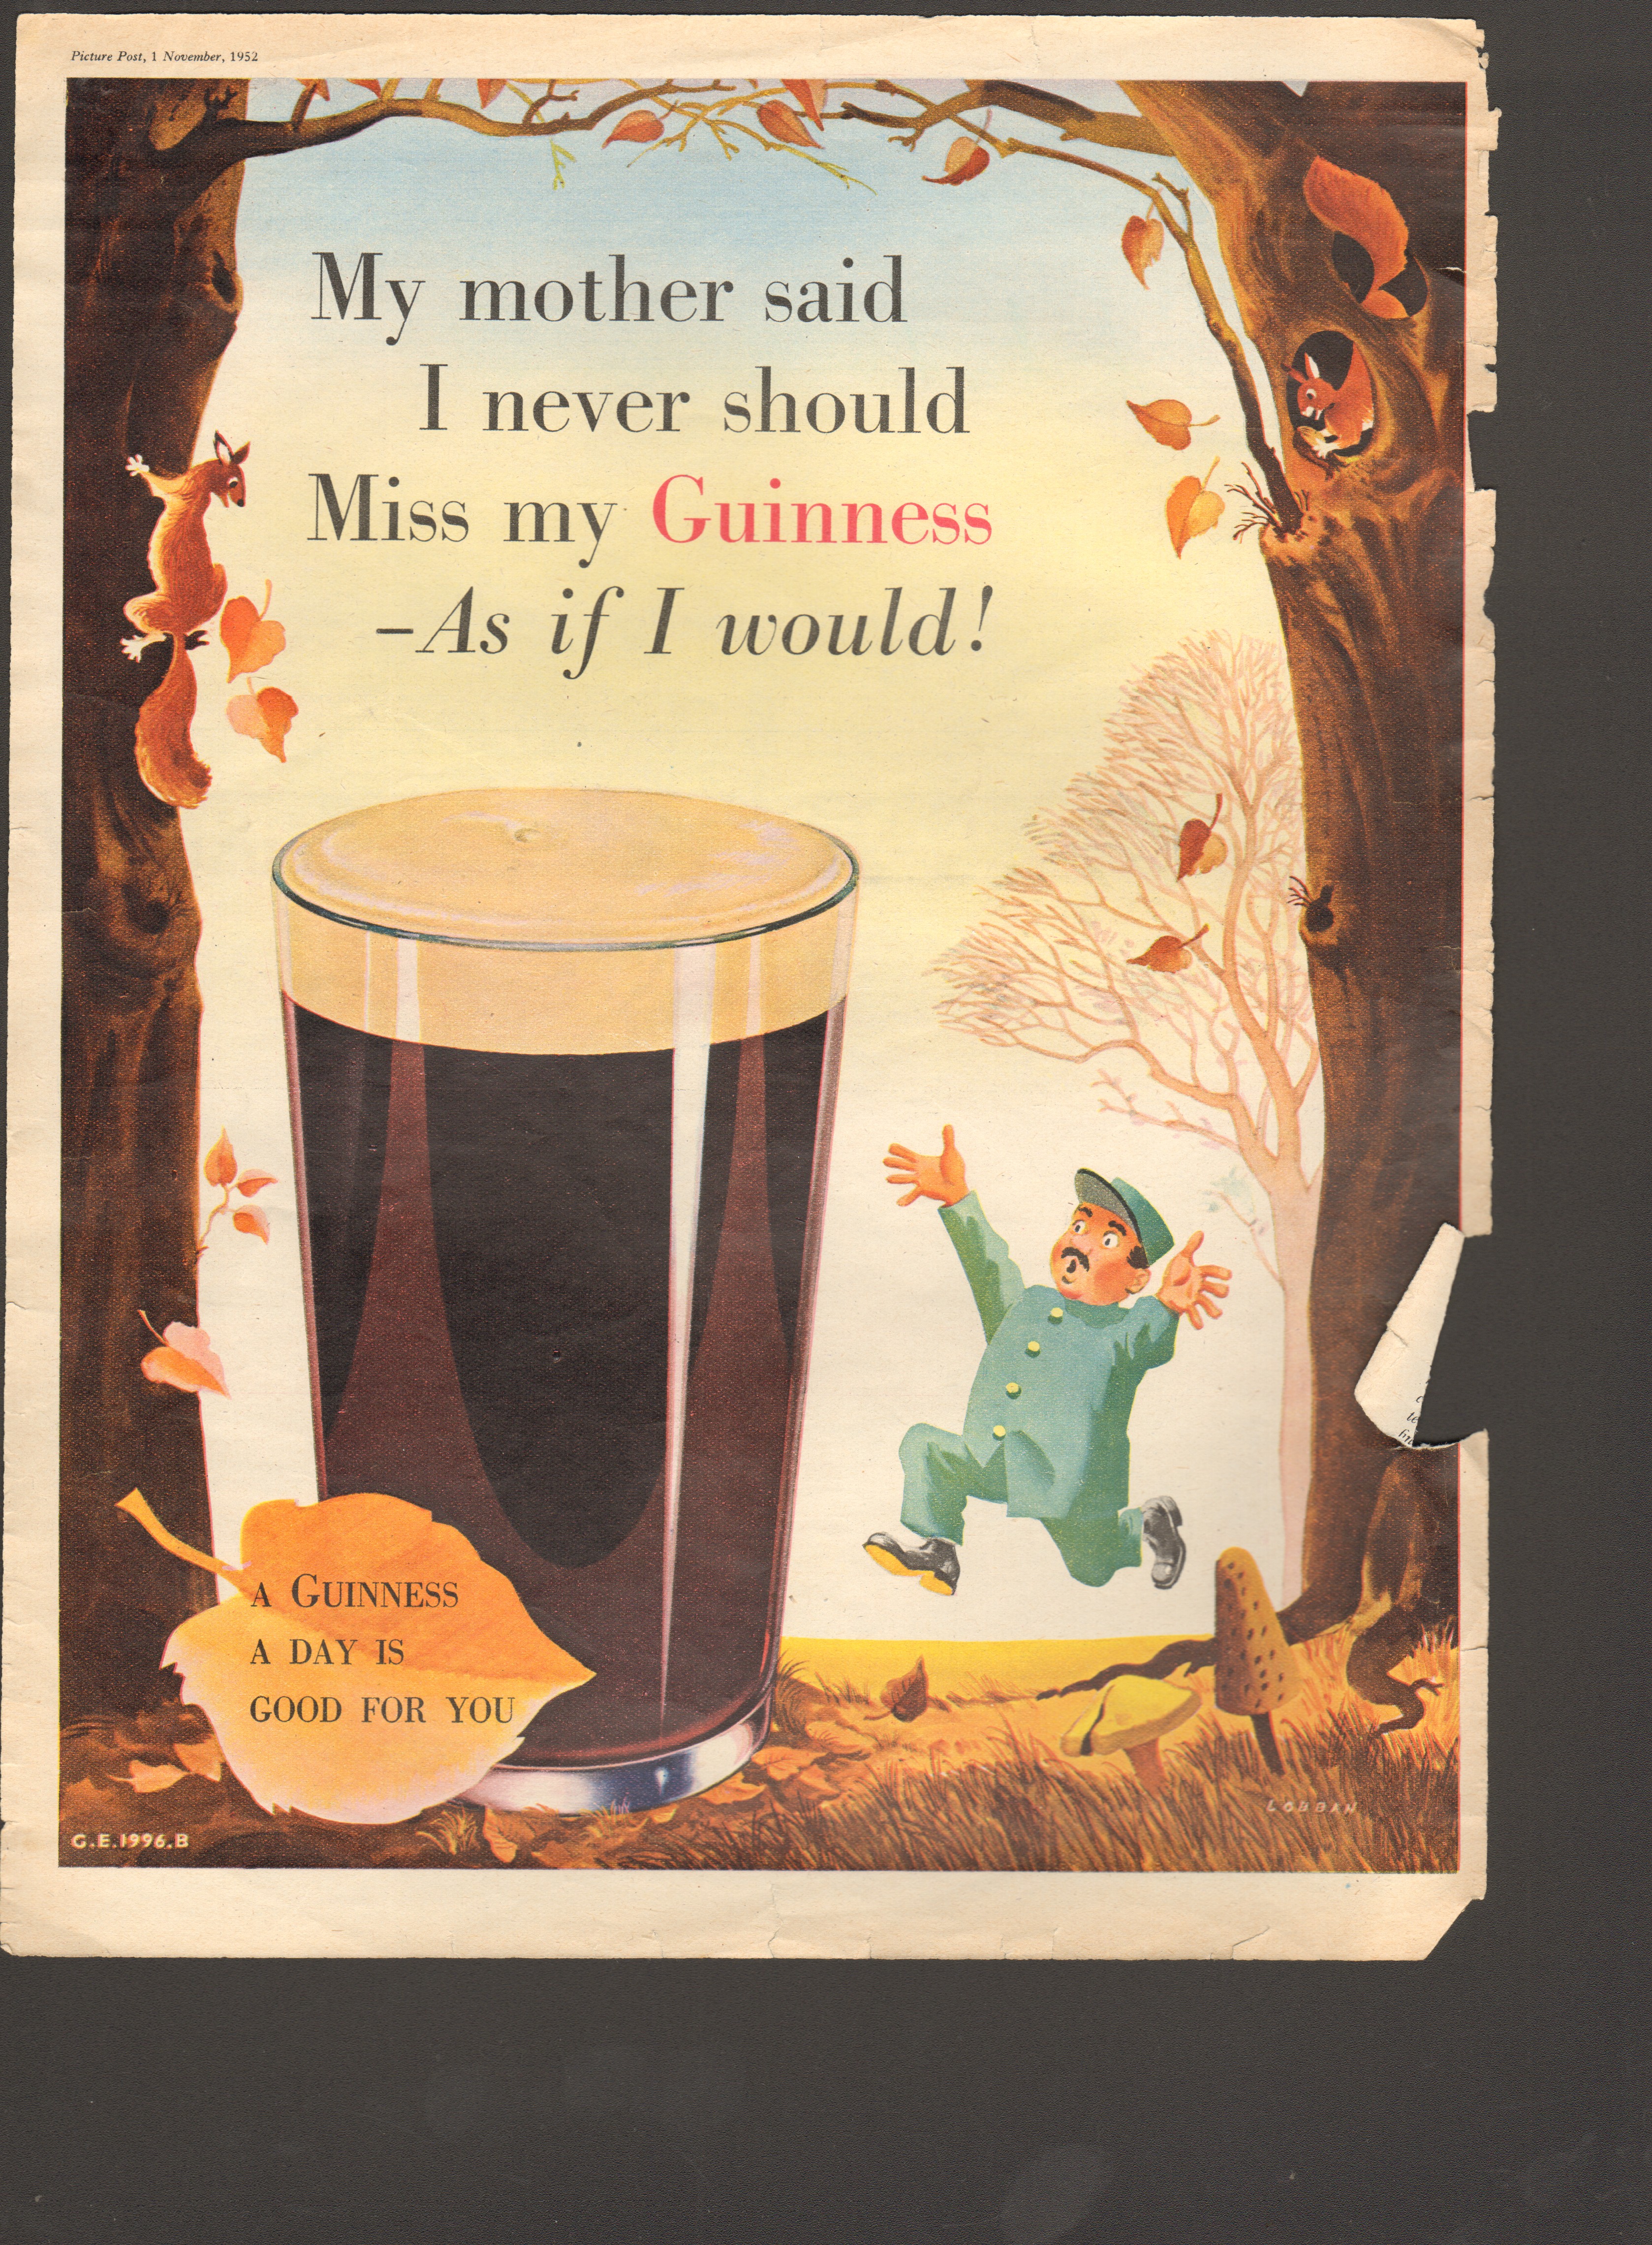 “ My Mother Said” 1952 , Guinness Code G.E. 1996.B